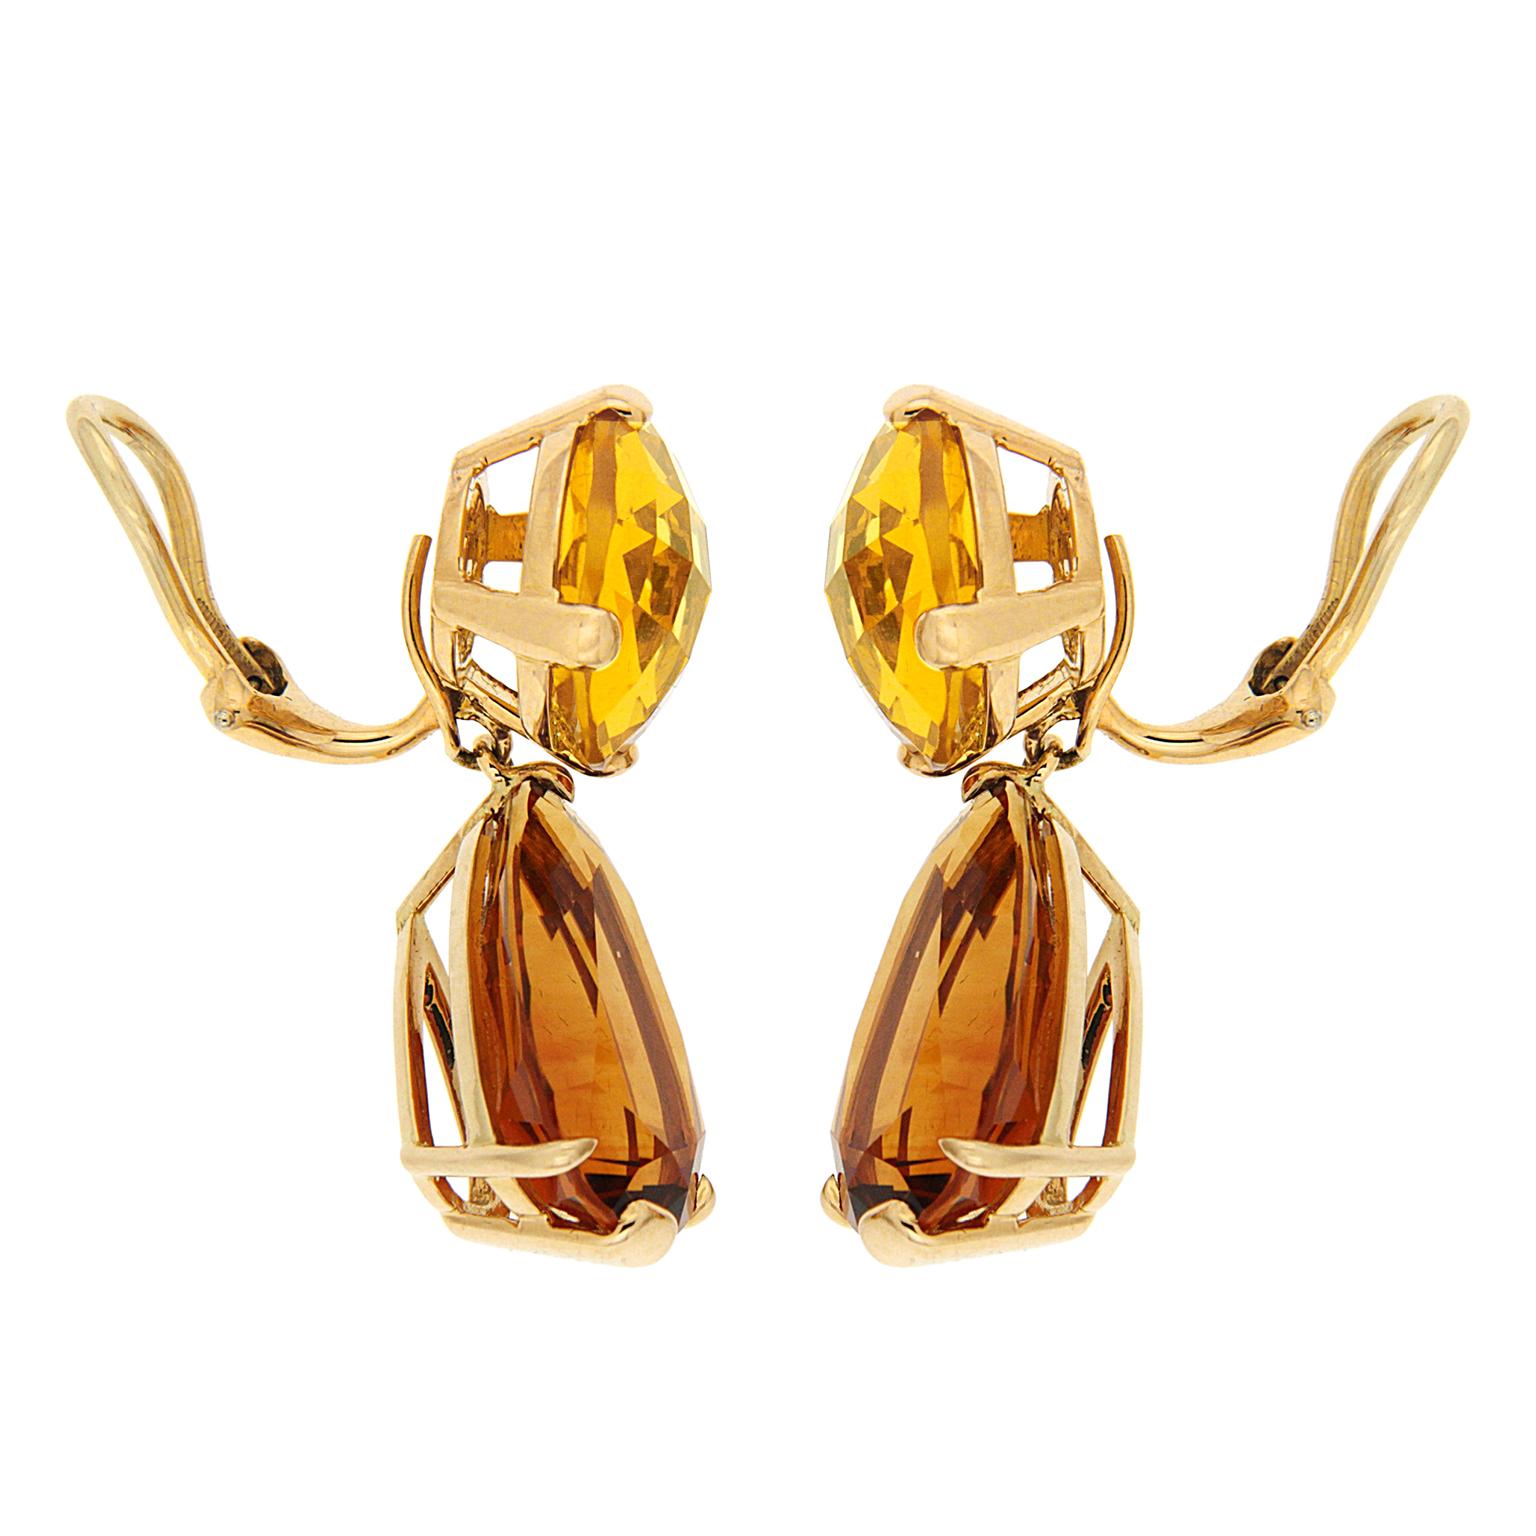 These earrings are made in 18kt yellow gold; they feature a light round checkerboard citrine and a dark pear shape citrine drop and are finished with clip-backs.  Measurement detail - width 0.6 inches (15 mm), length 1.42 inches (36 mm), depth 0.4